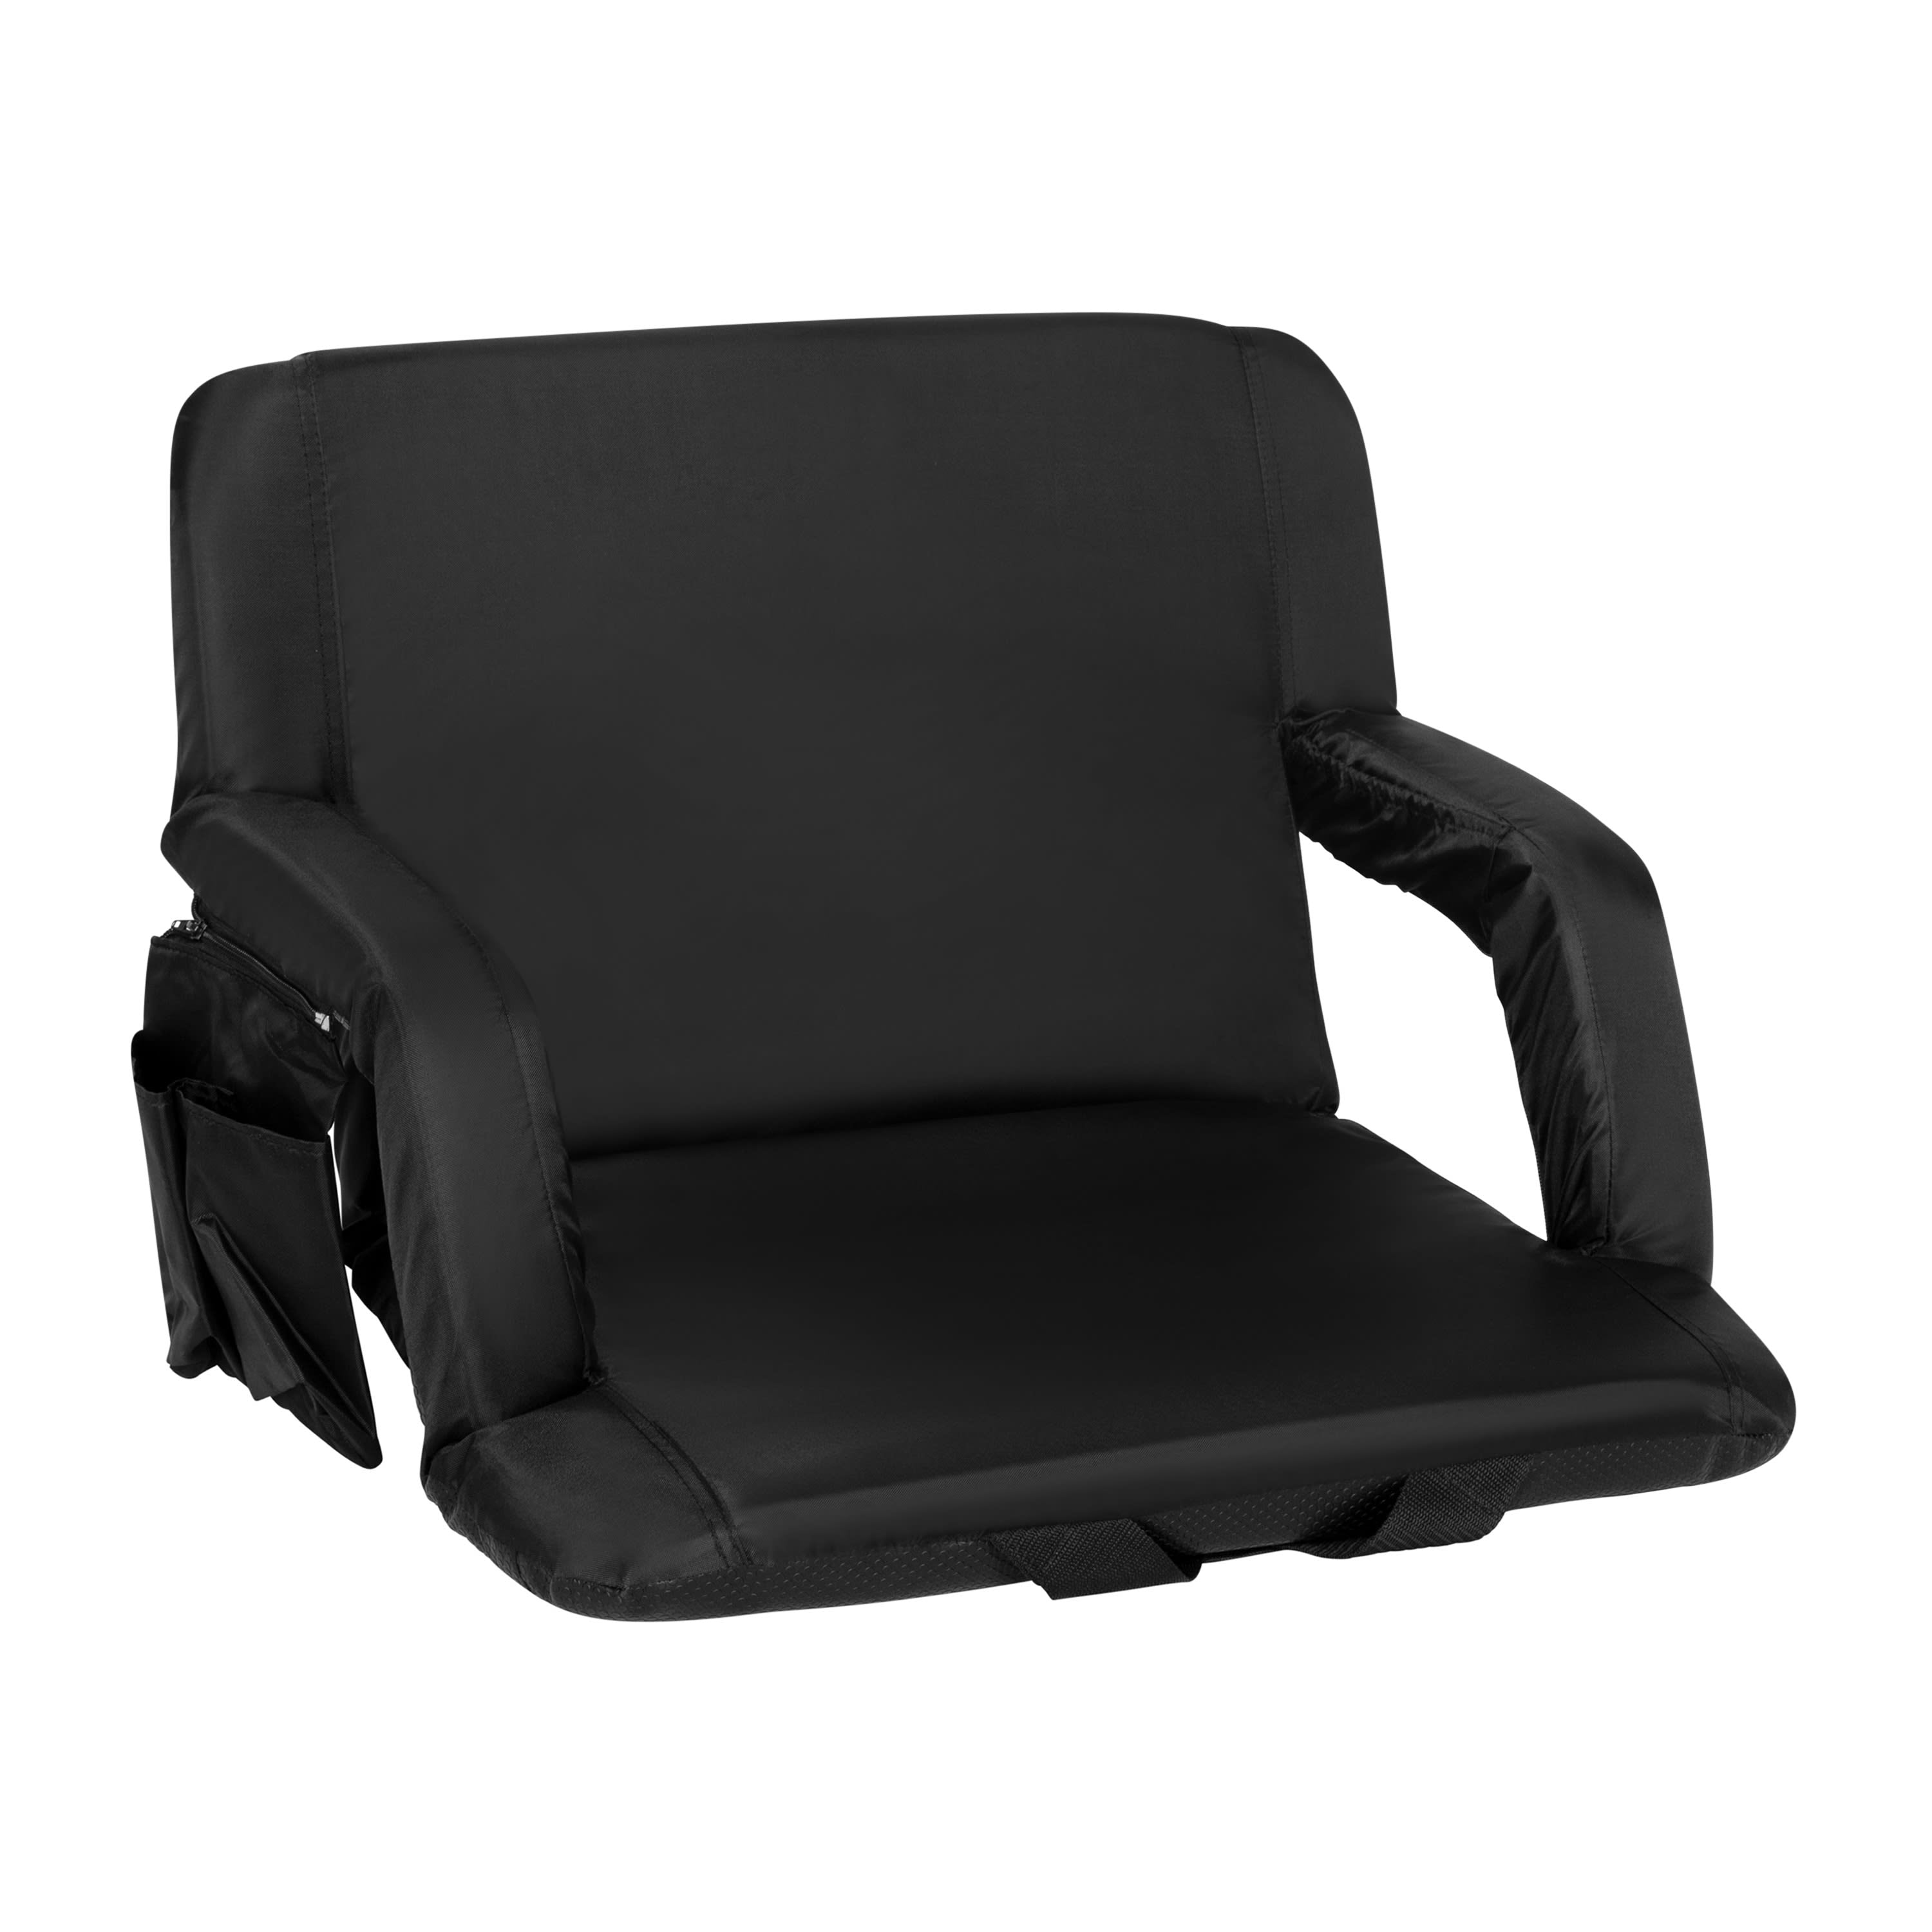 https://cdn.shopify.com/s/files/1/0768/6474/9869/files/Extra_Wide_Lightweight_Reclining_Stadium_Chair_with_Armrests__Padded_Back___Seat_with_Dual_Storage_Pockets_and_Backpack_Straps_2023-11-02T09-07-48Z_1.jpg?v=1701441328